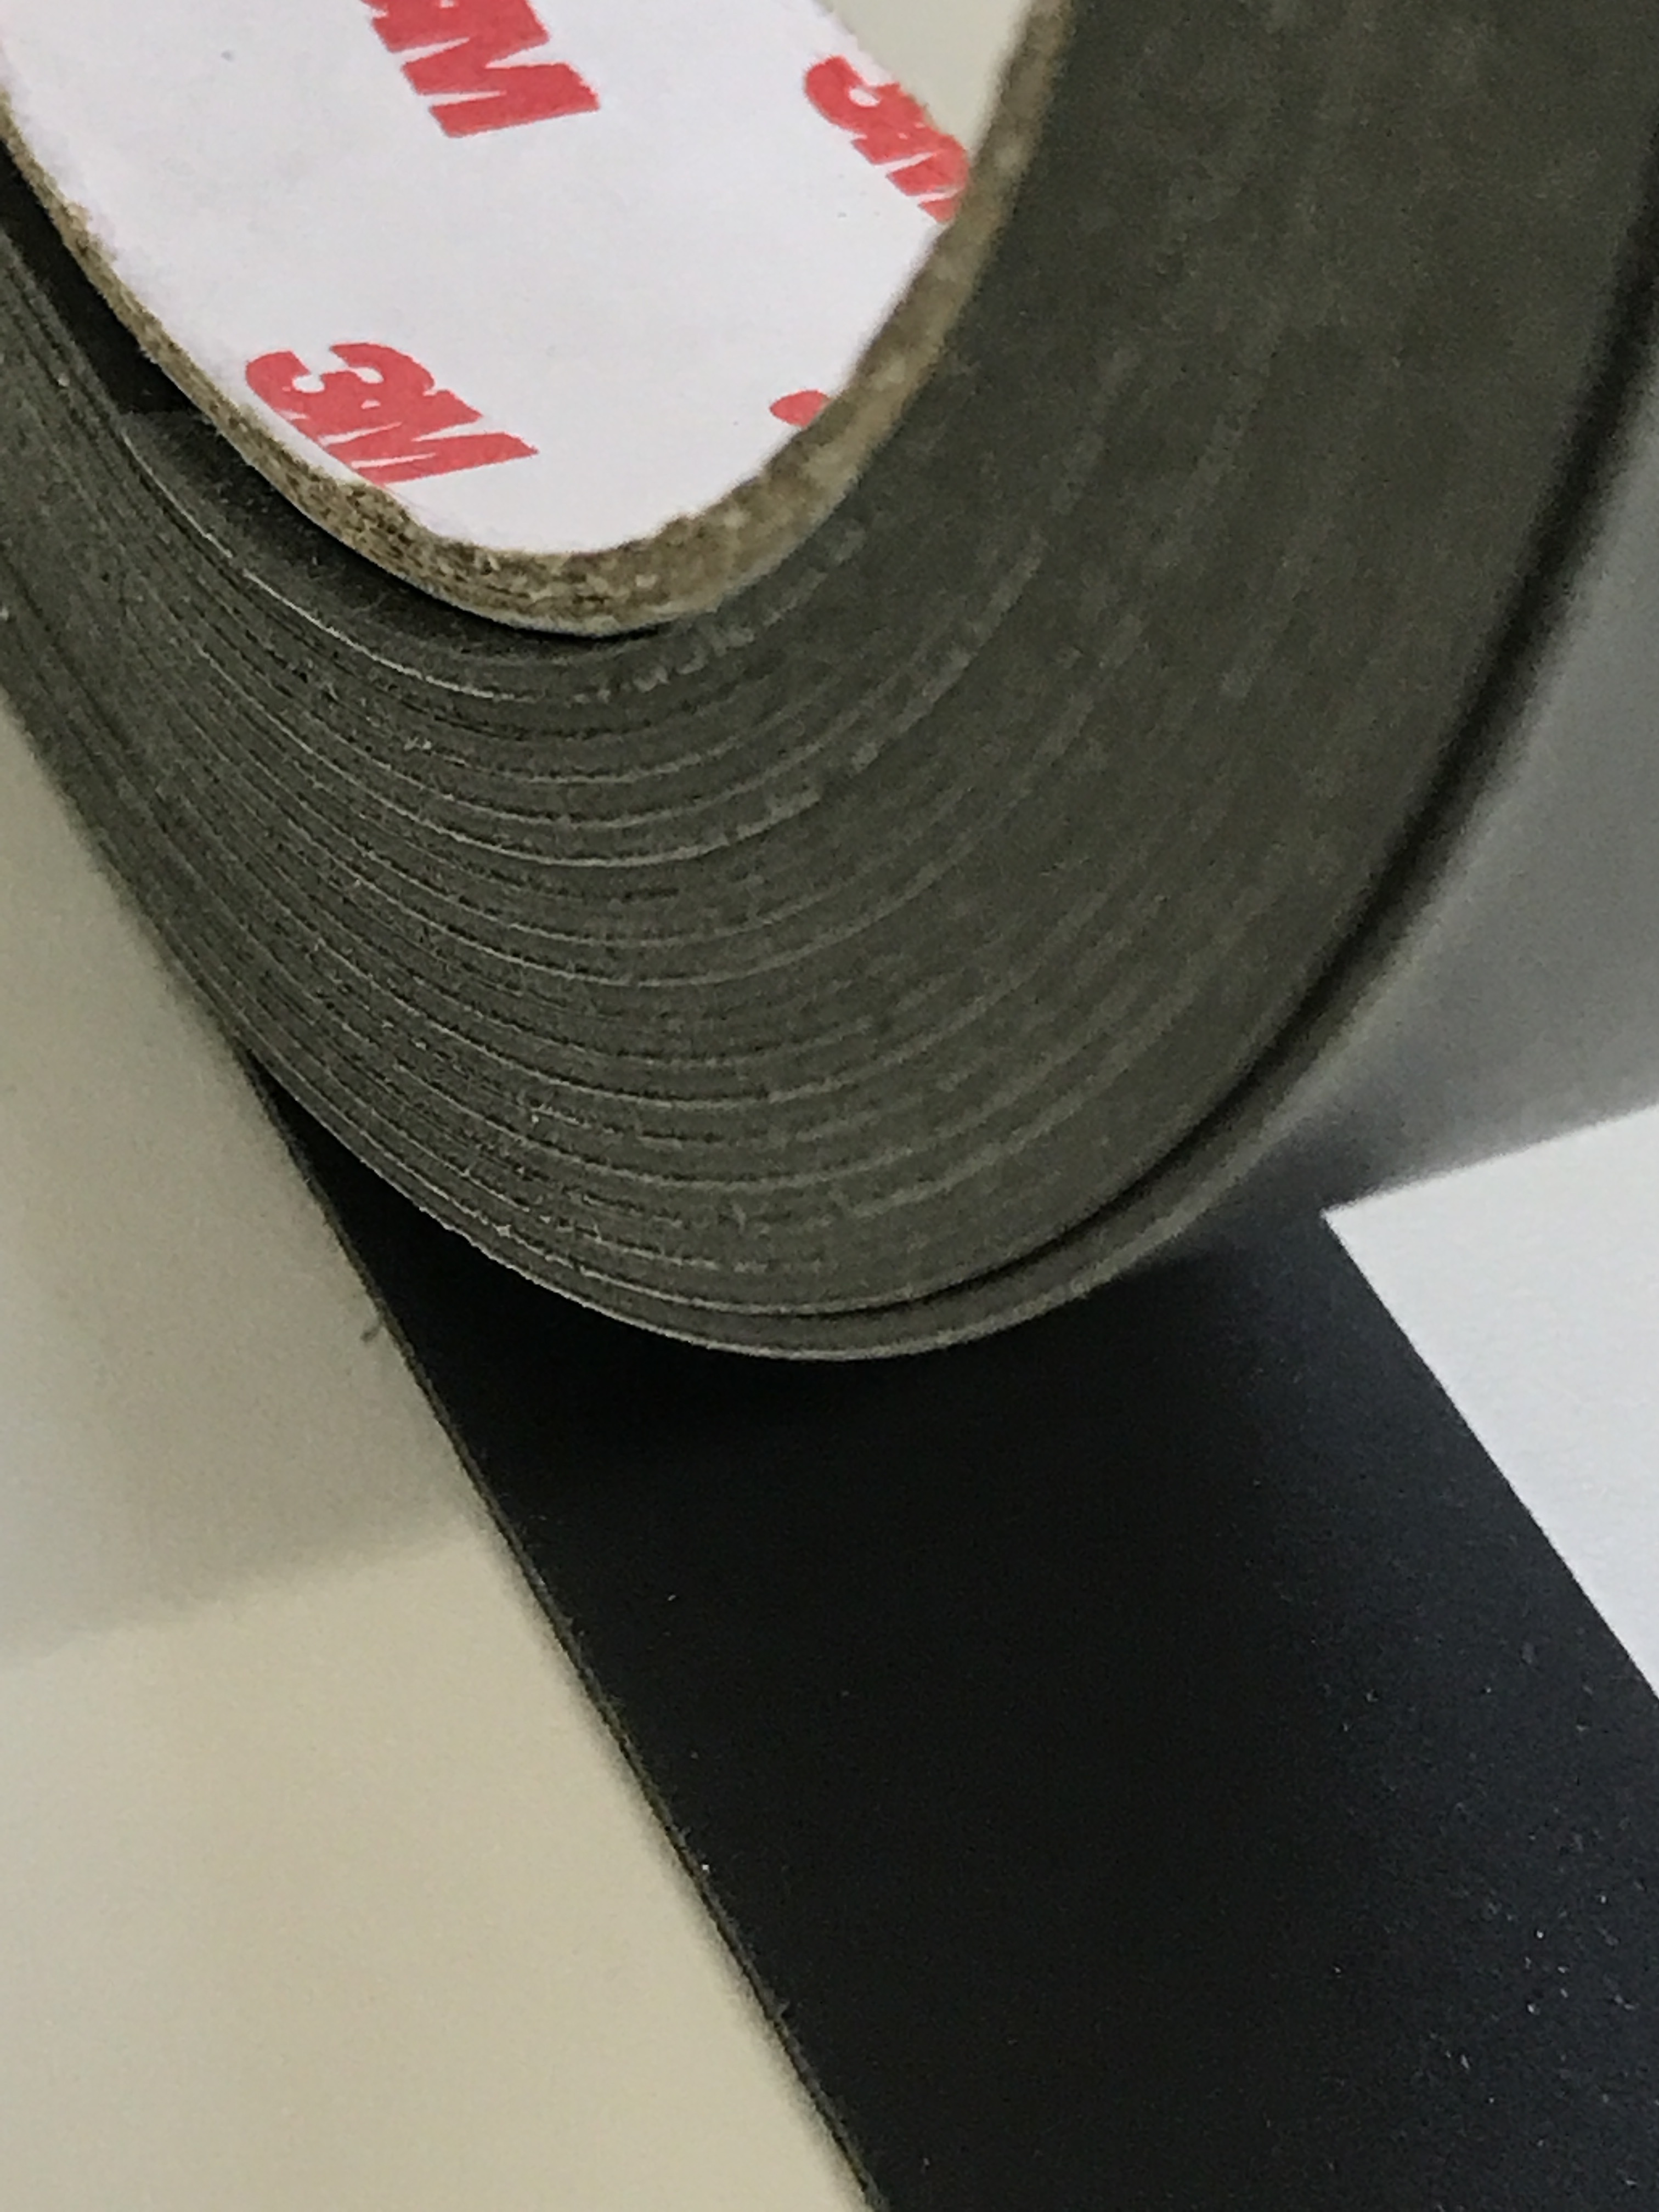 Thin Durable Rubber Tape - Single Sided - 3M